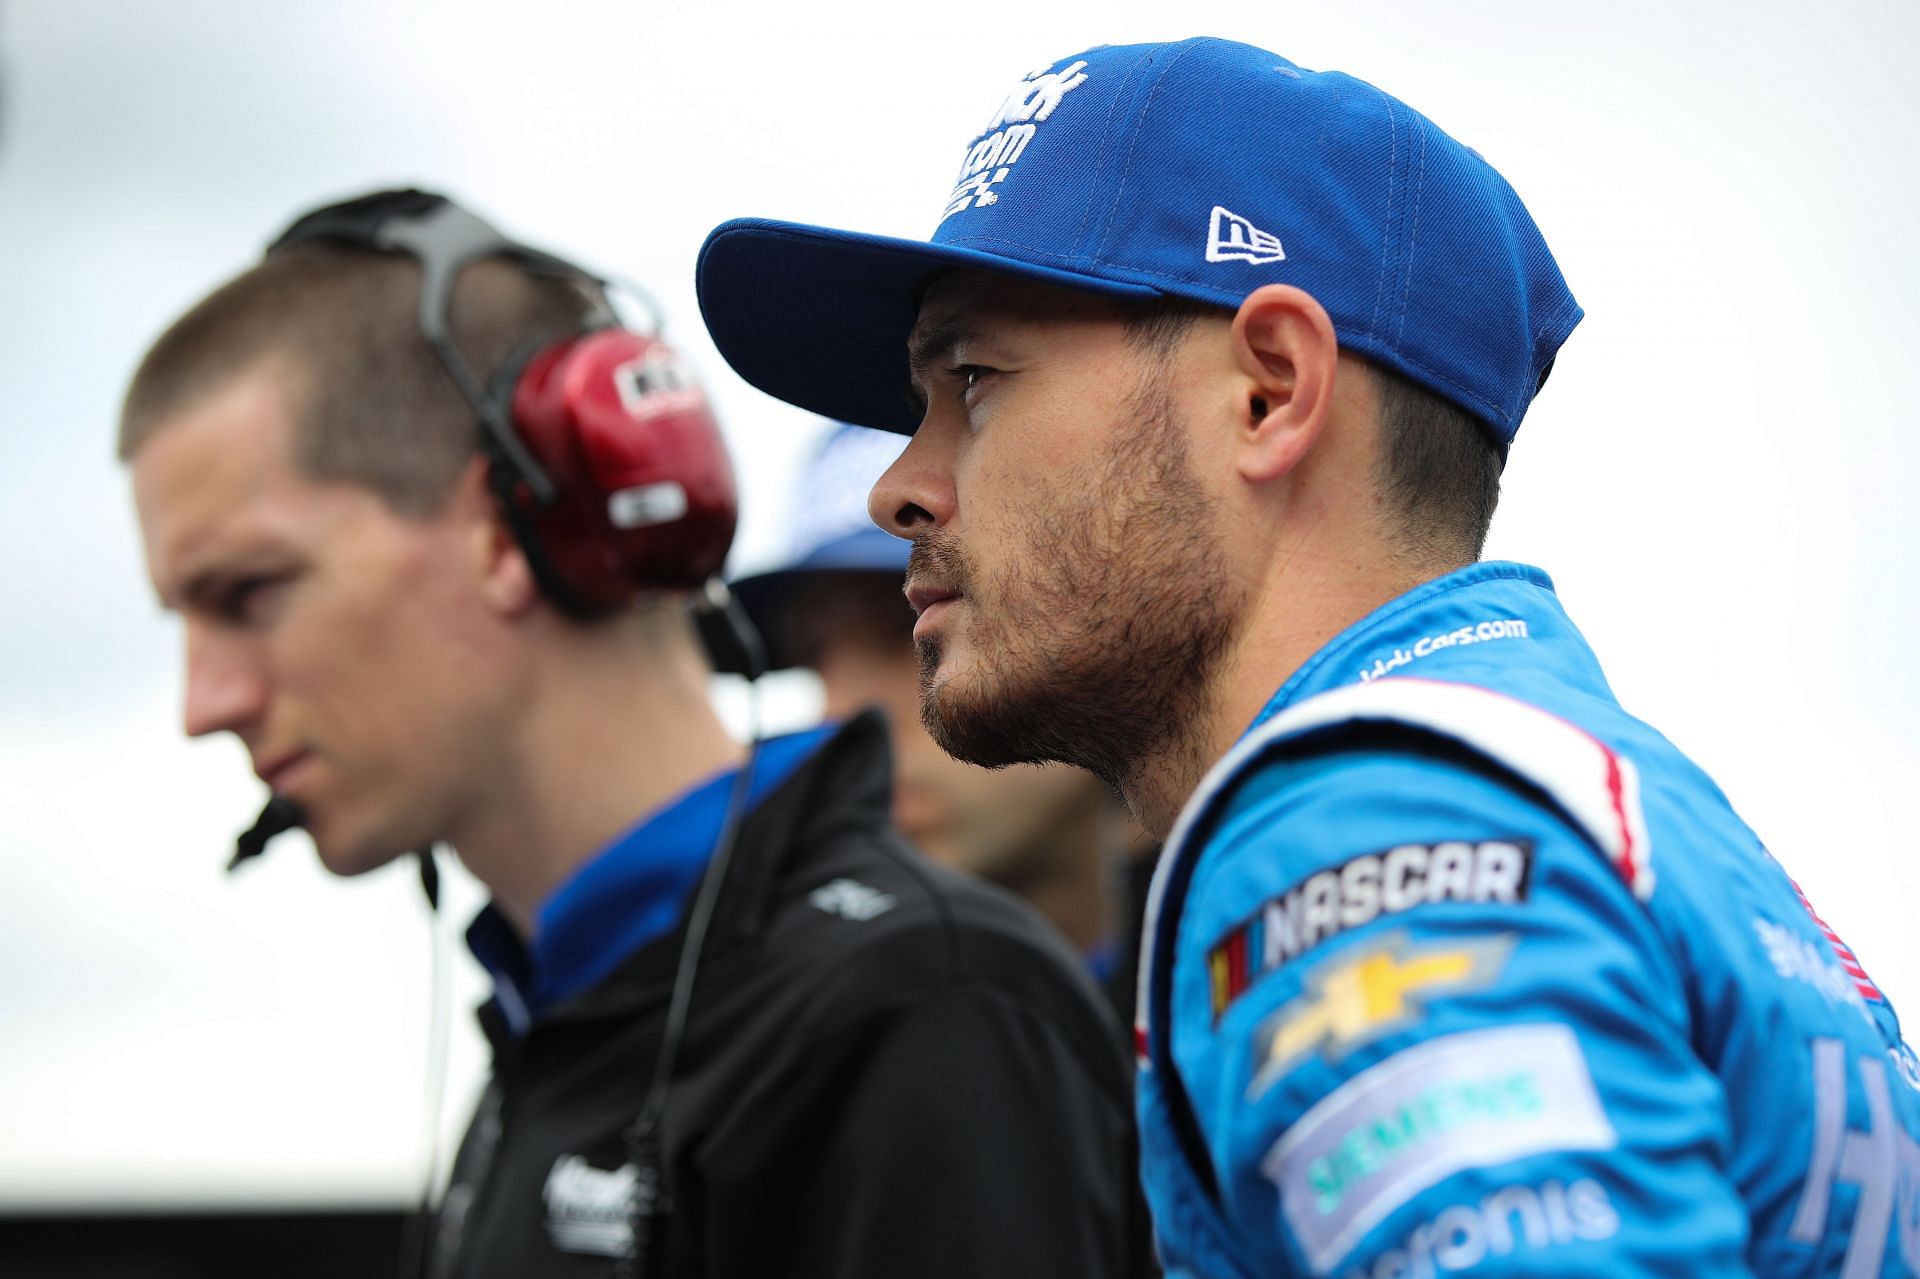 Kyle Larson looks on during practice for the NASCAR Cup Series Blue-Emu Maximum Pain Relief 400 at Martinsville Speedway.